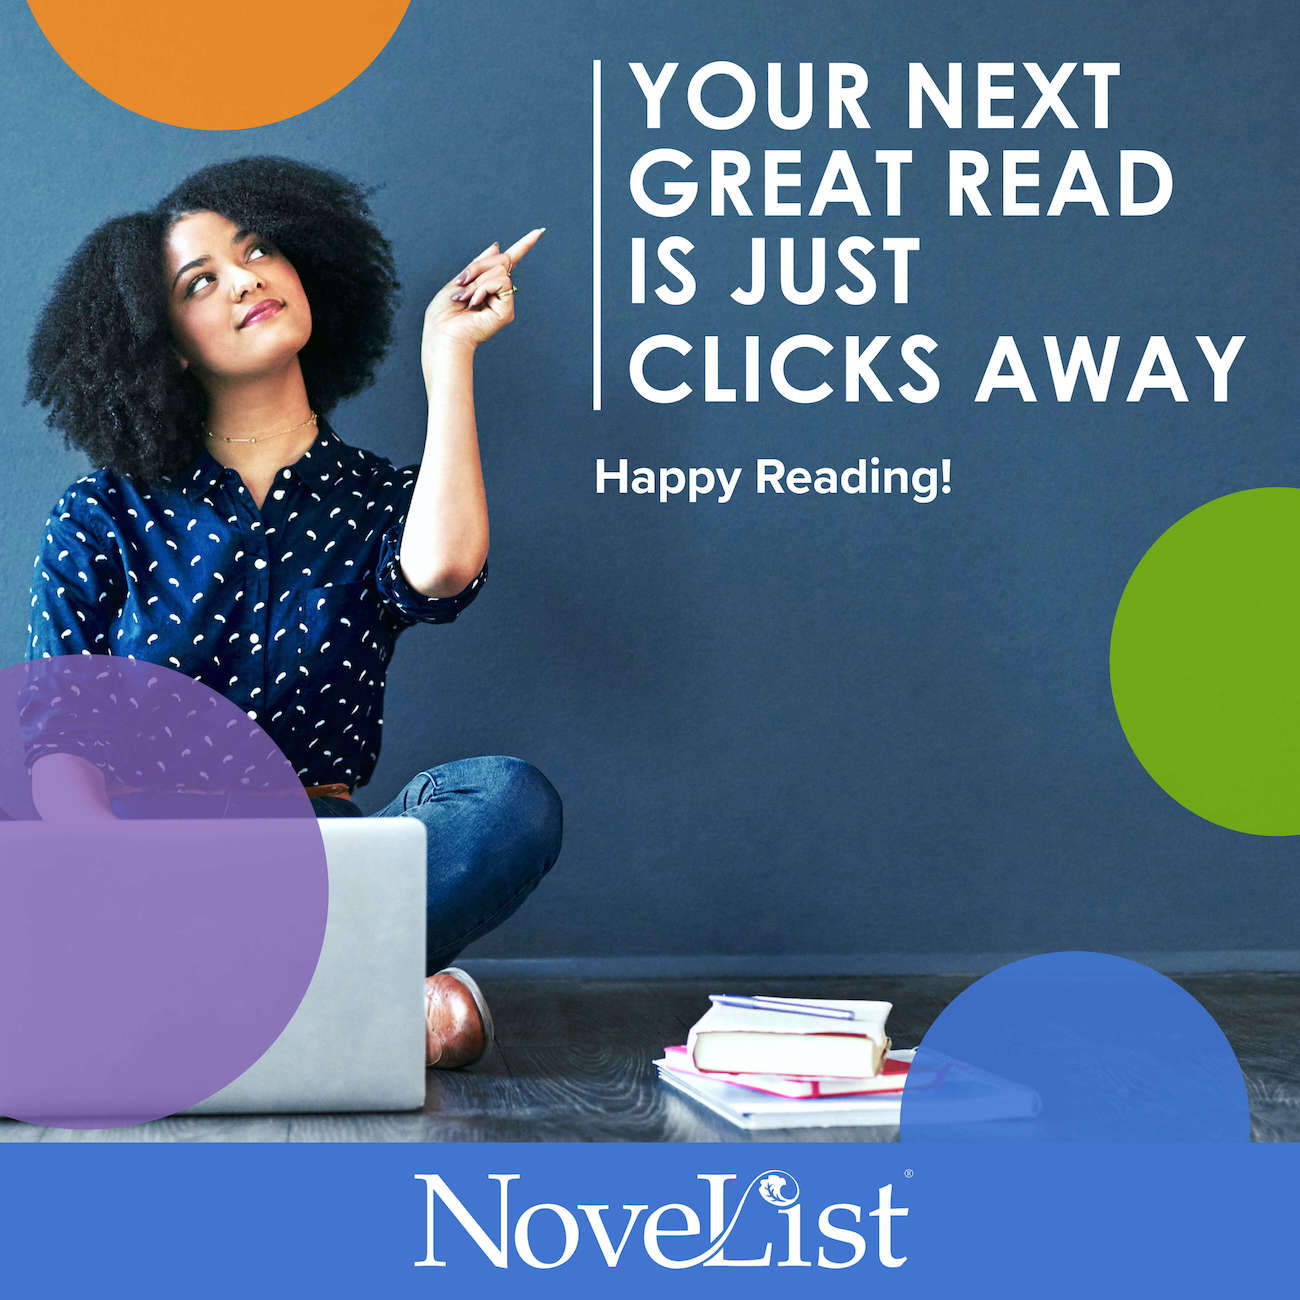 Image of a girl sitting at a laptop, pointing at text which reads "Your Next Great Read is Just Clicks Away. Happy Reading! Novelist"